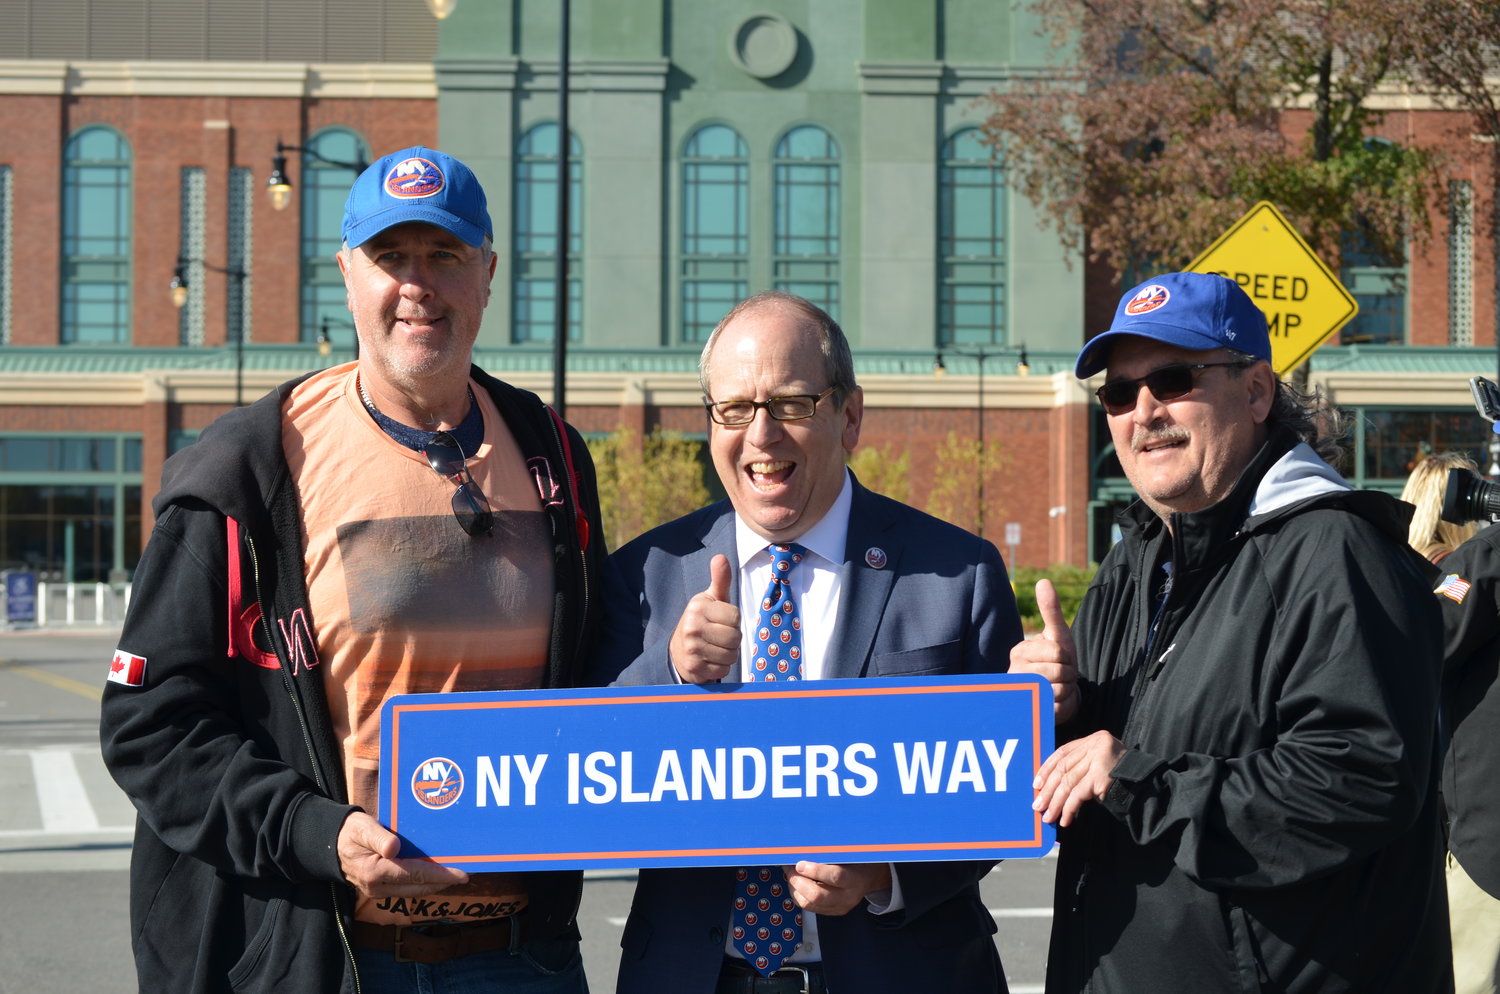 Holding the new NY Islanders Way sign outside Elmont’s UBS Arena were, from left, Dale Hayes, an Islanders fan who lives in Canada, team co-owner Jon Ledecky and Hayes’s friend Joe Mesa.